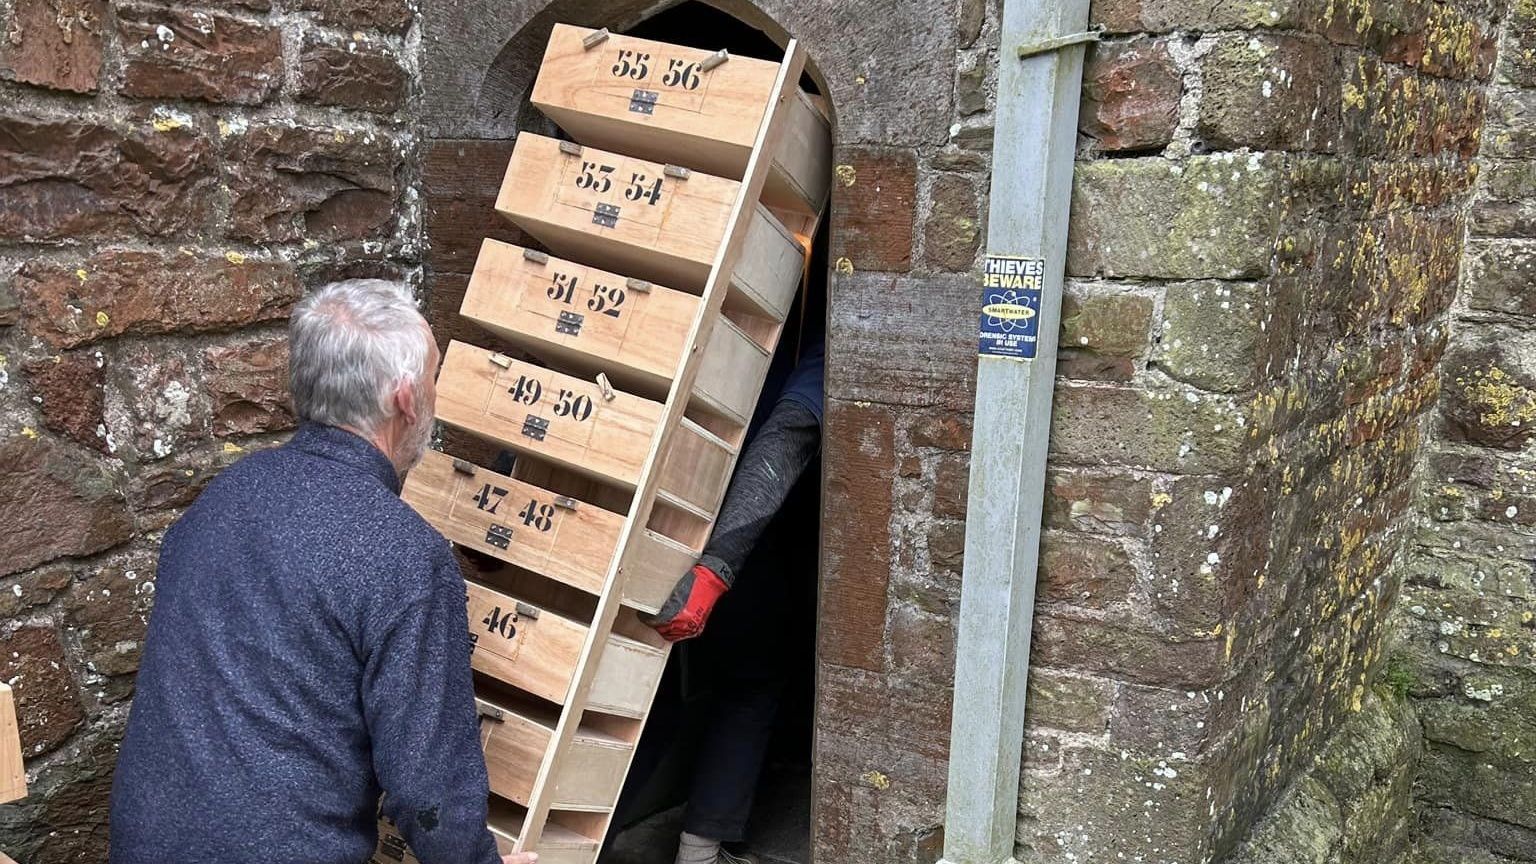 Two men trying to get the nesting box cabinets through a very narrow doorway.